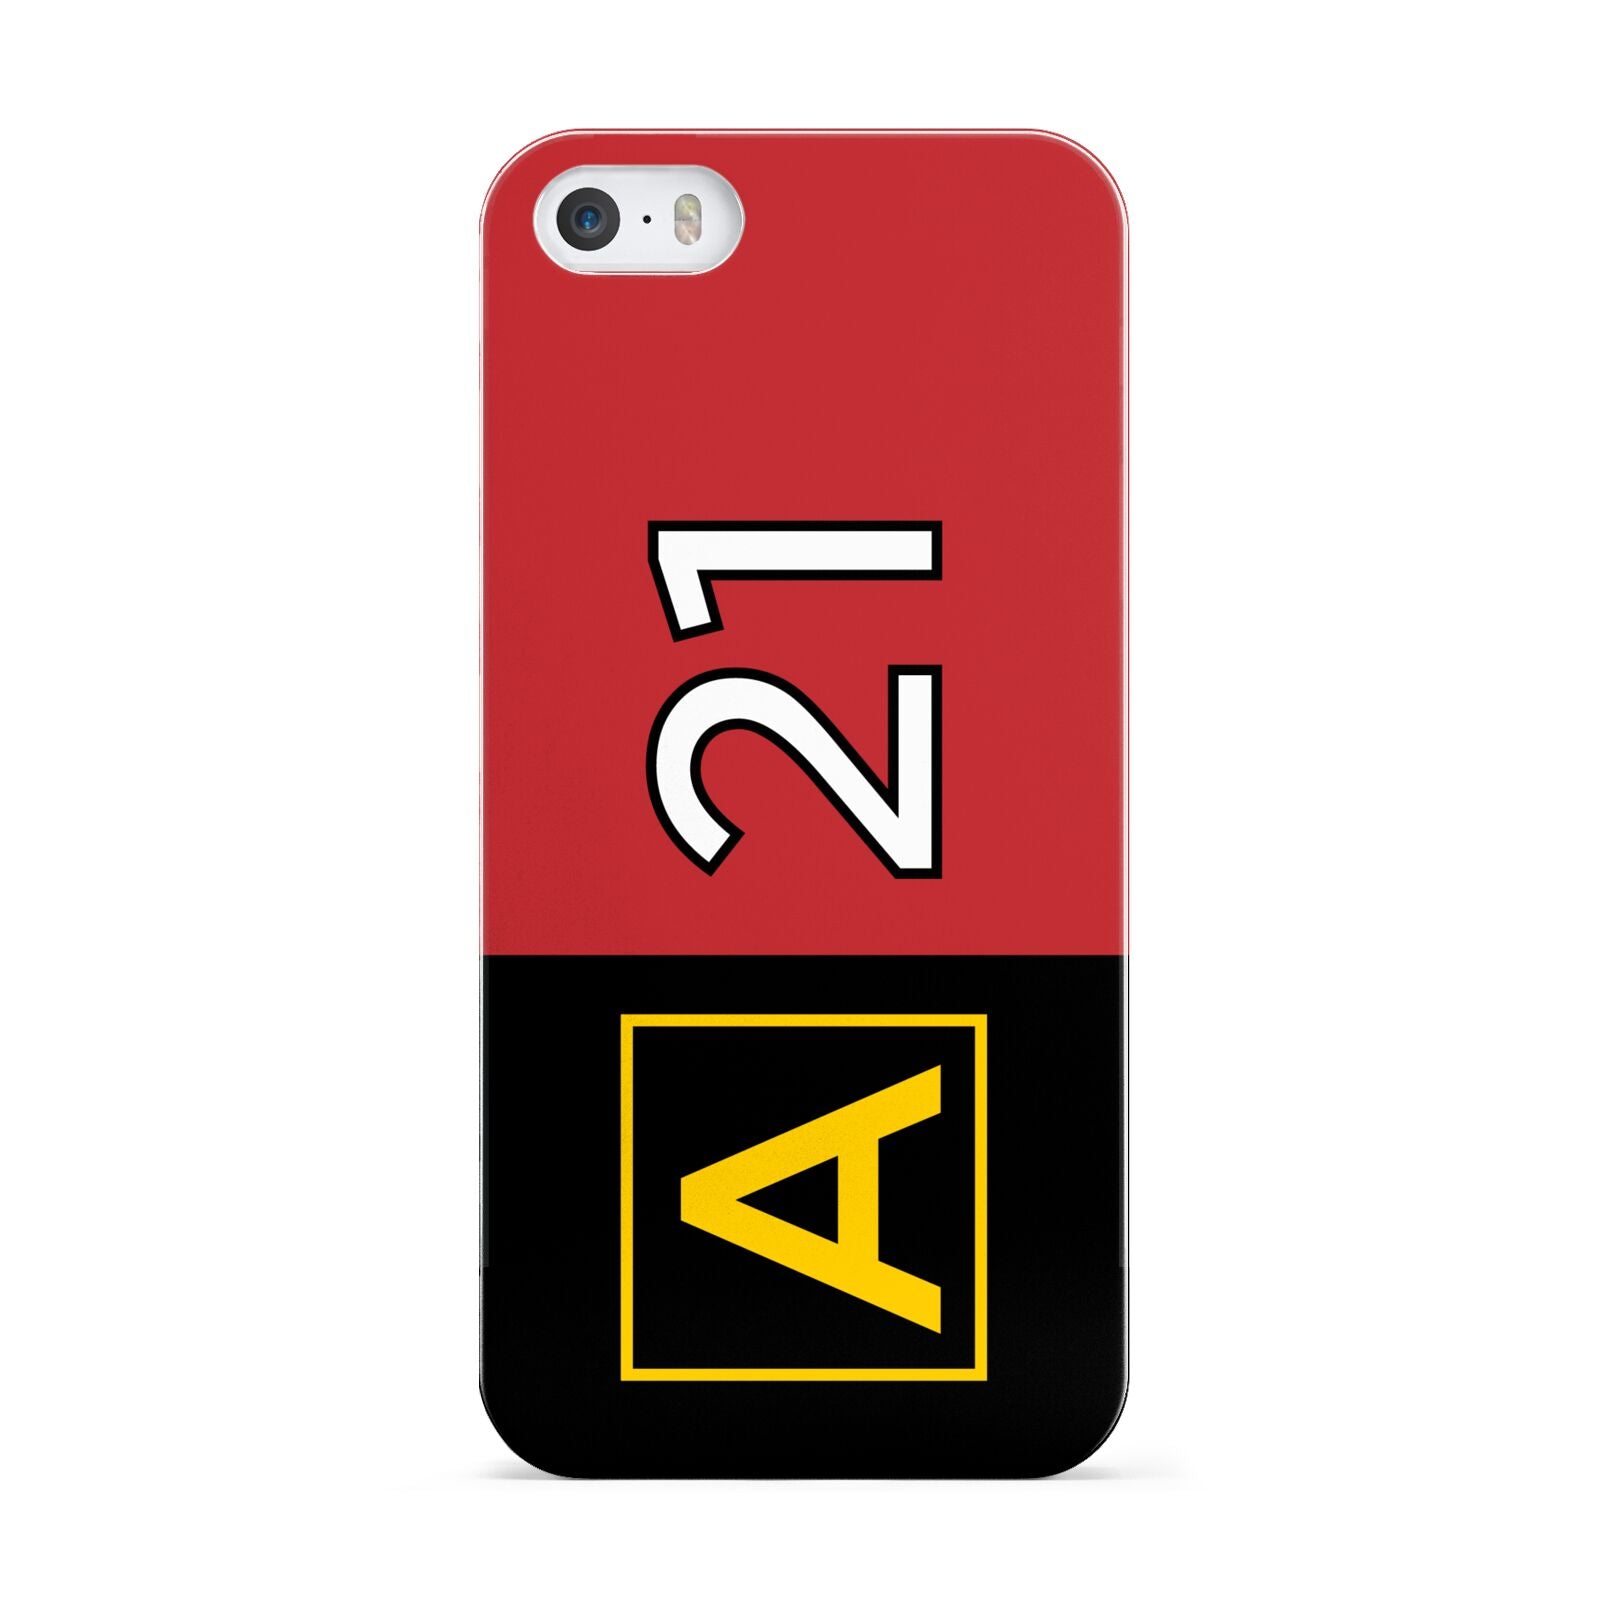 Custom Runway Location and Hold Position Apple iPhone 5 Case